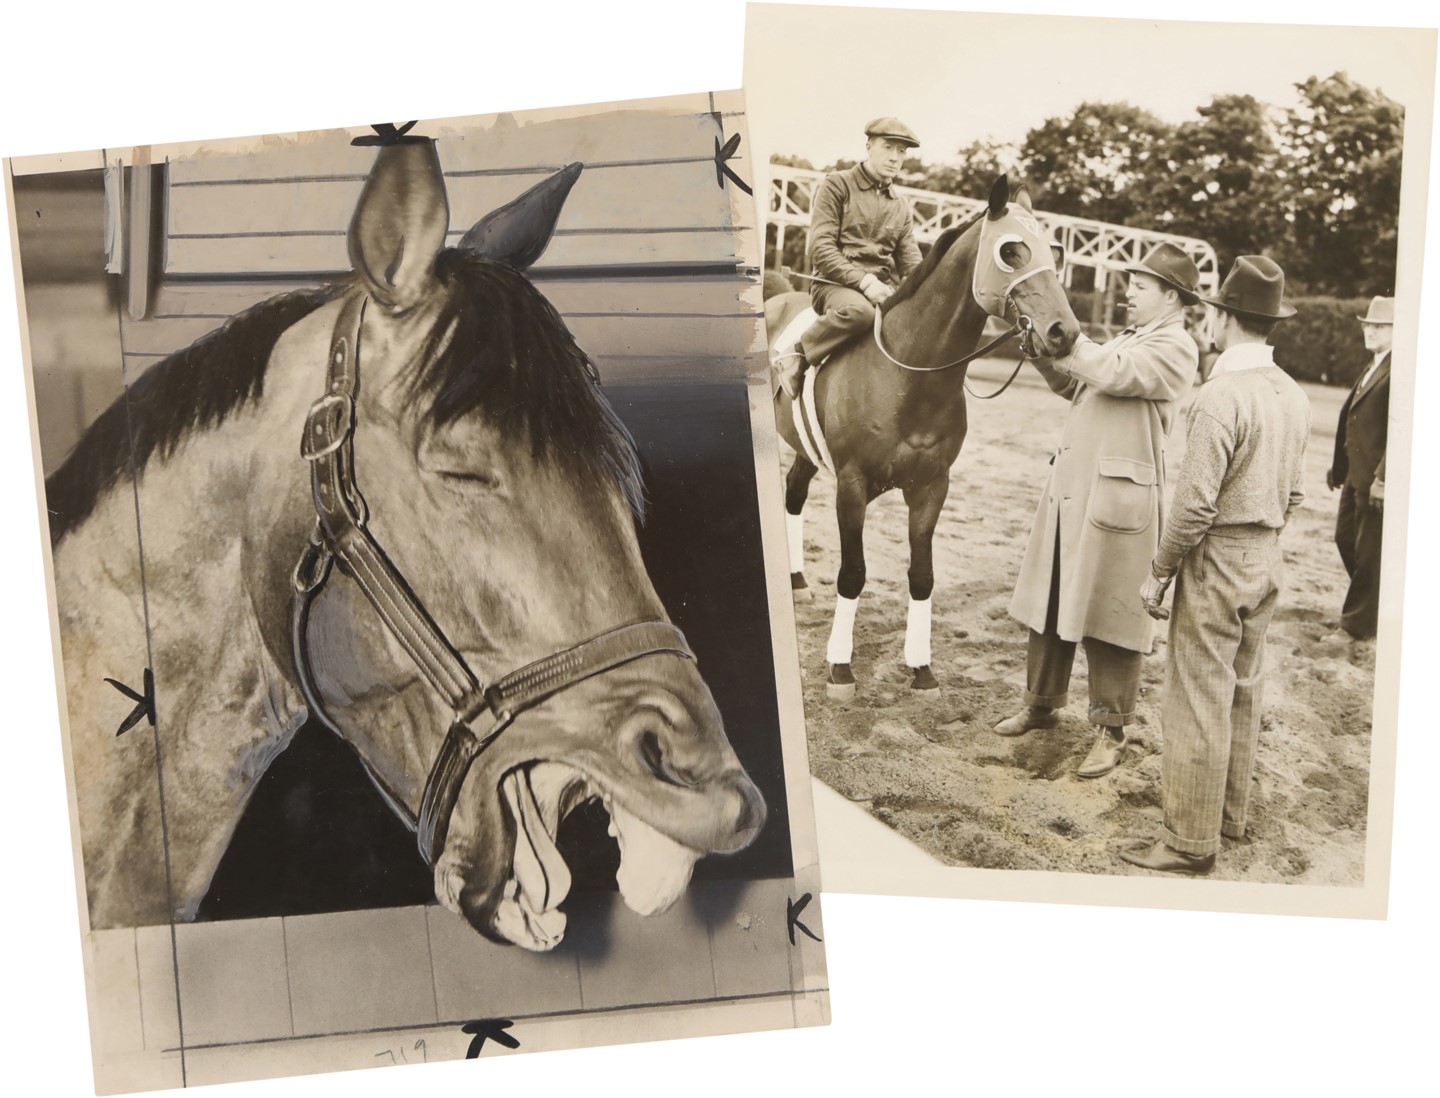 Seabiscuit Press Photo Collection (19)